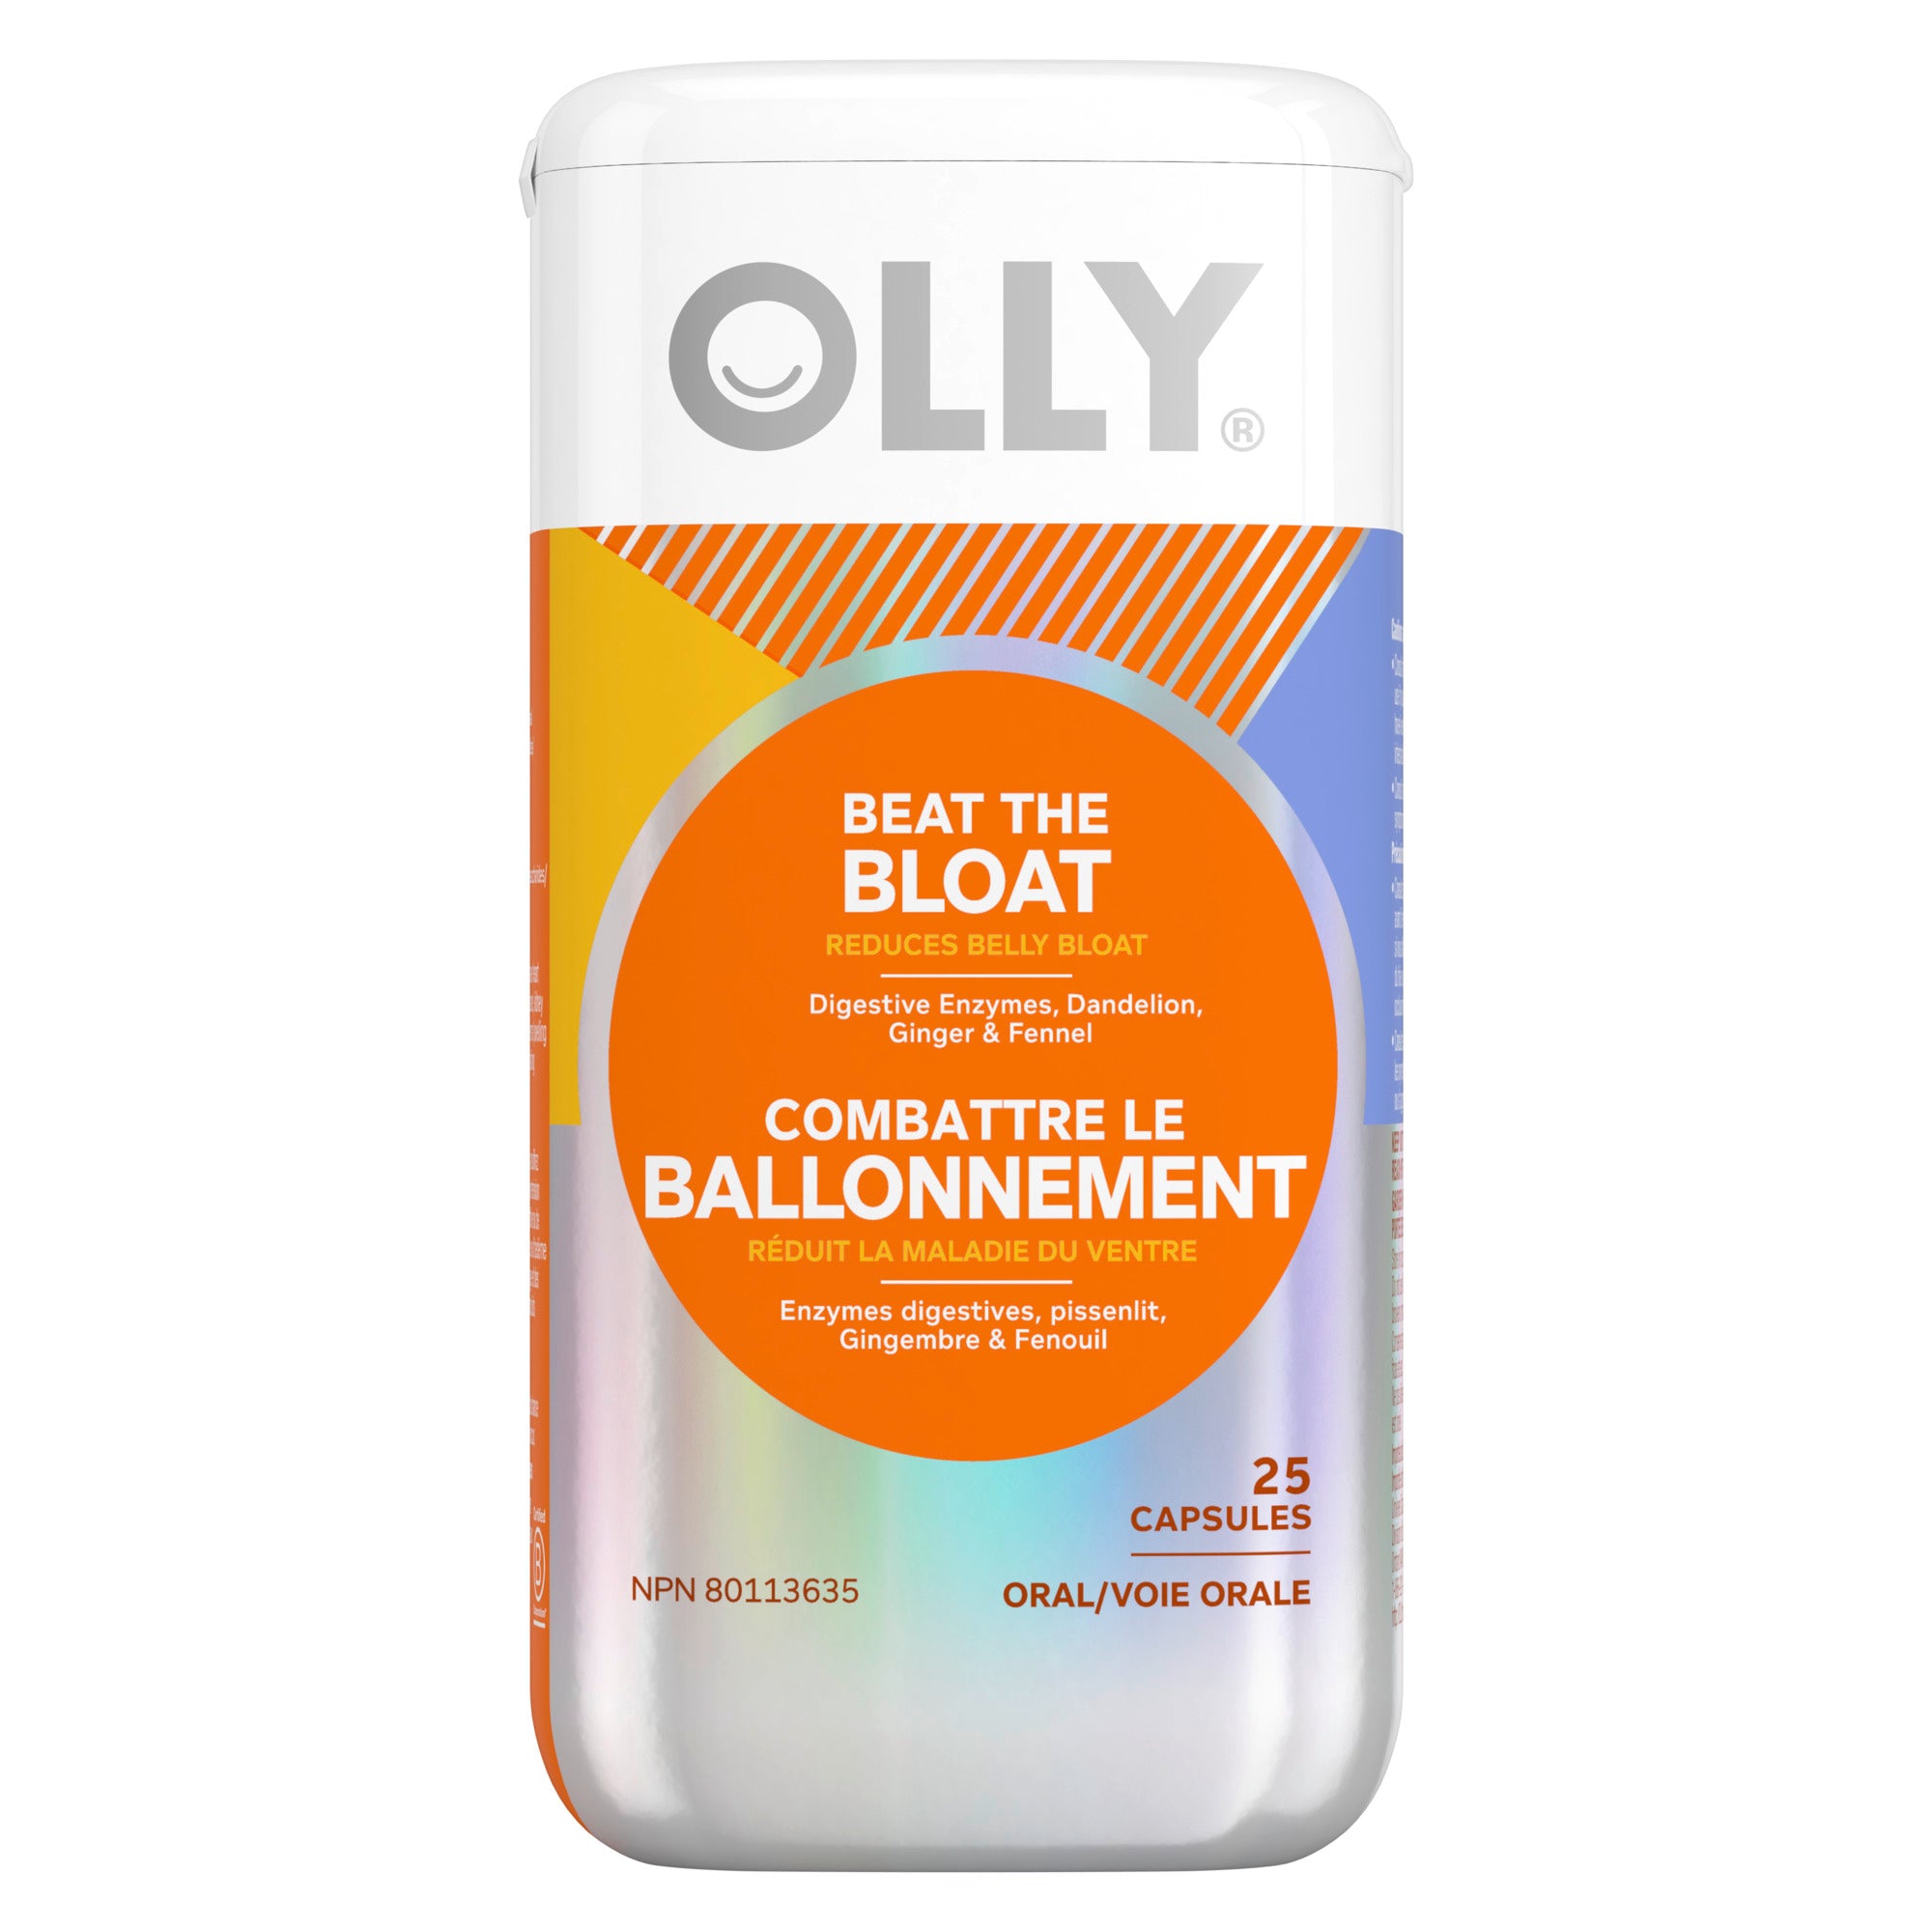 Frontside view of the OLLY Beat The Bloat 25 Capsules packaging.